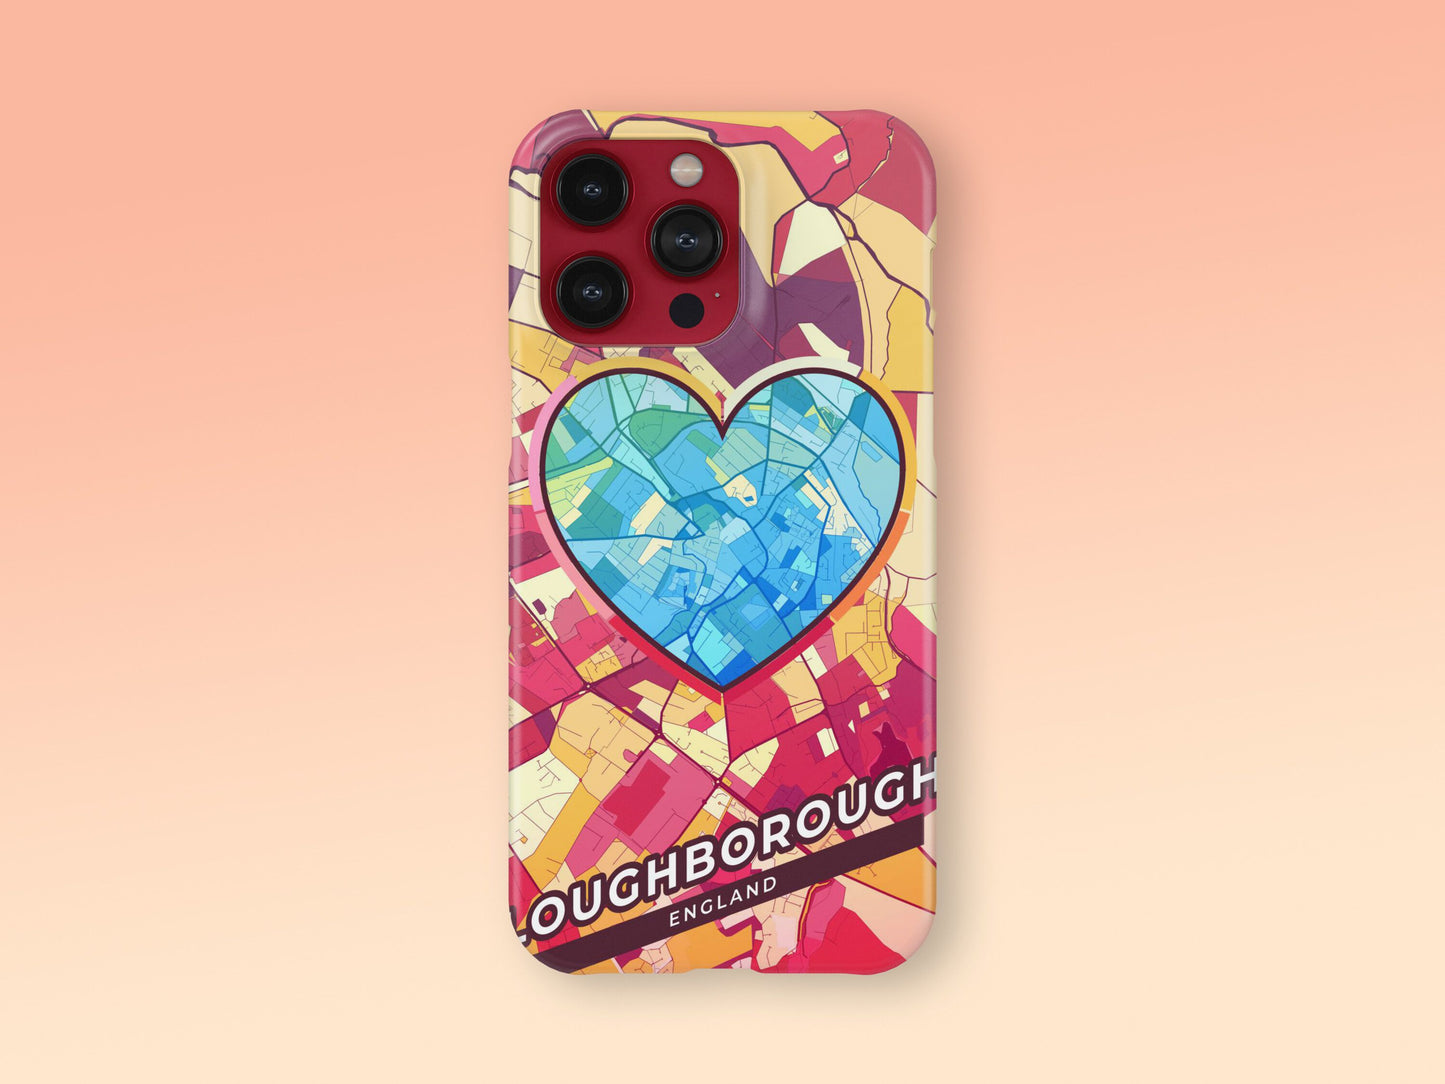 Loughborough England slim phone case with colorful icon. Birthday, wedding or housewarming gift. Couple match cases. 2